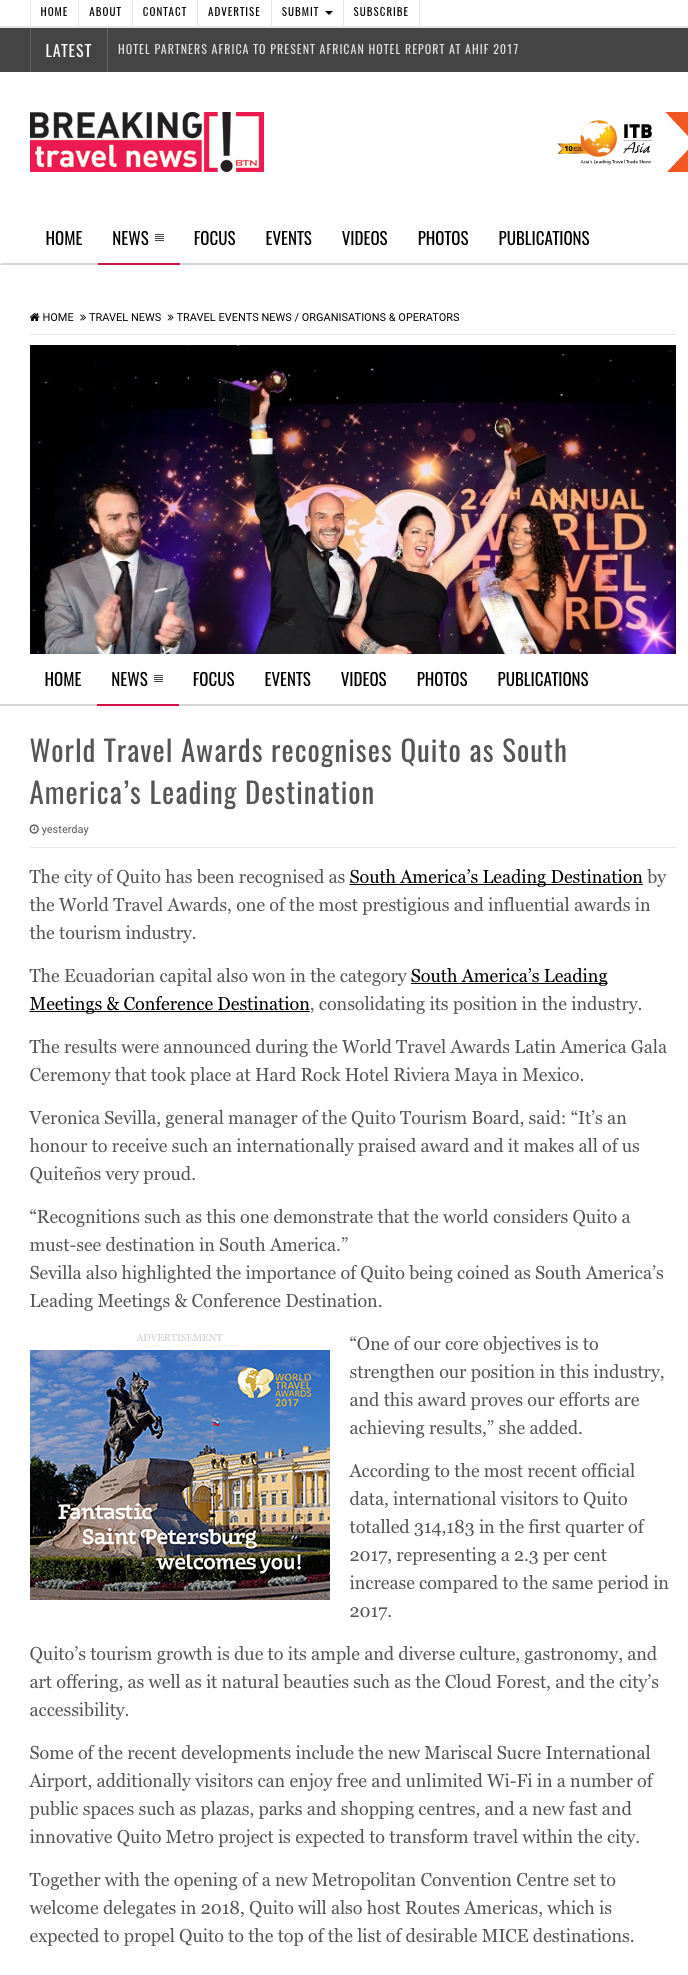 World Travel Awards recognises Quito as South America’s Leading Destination